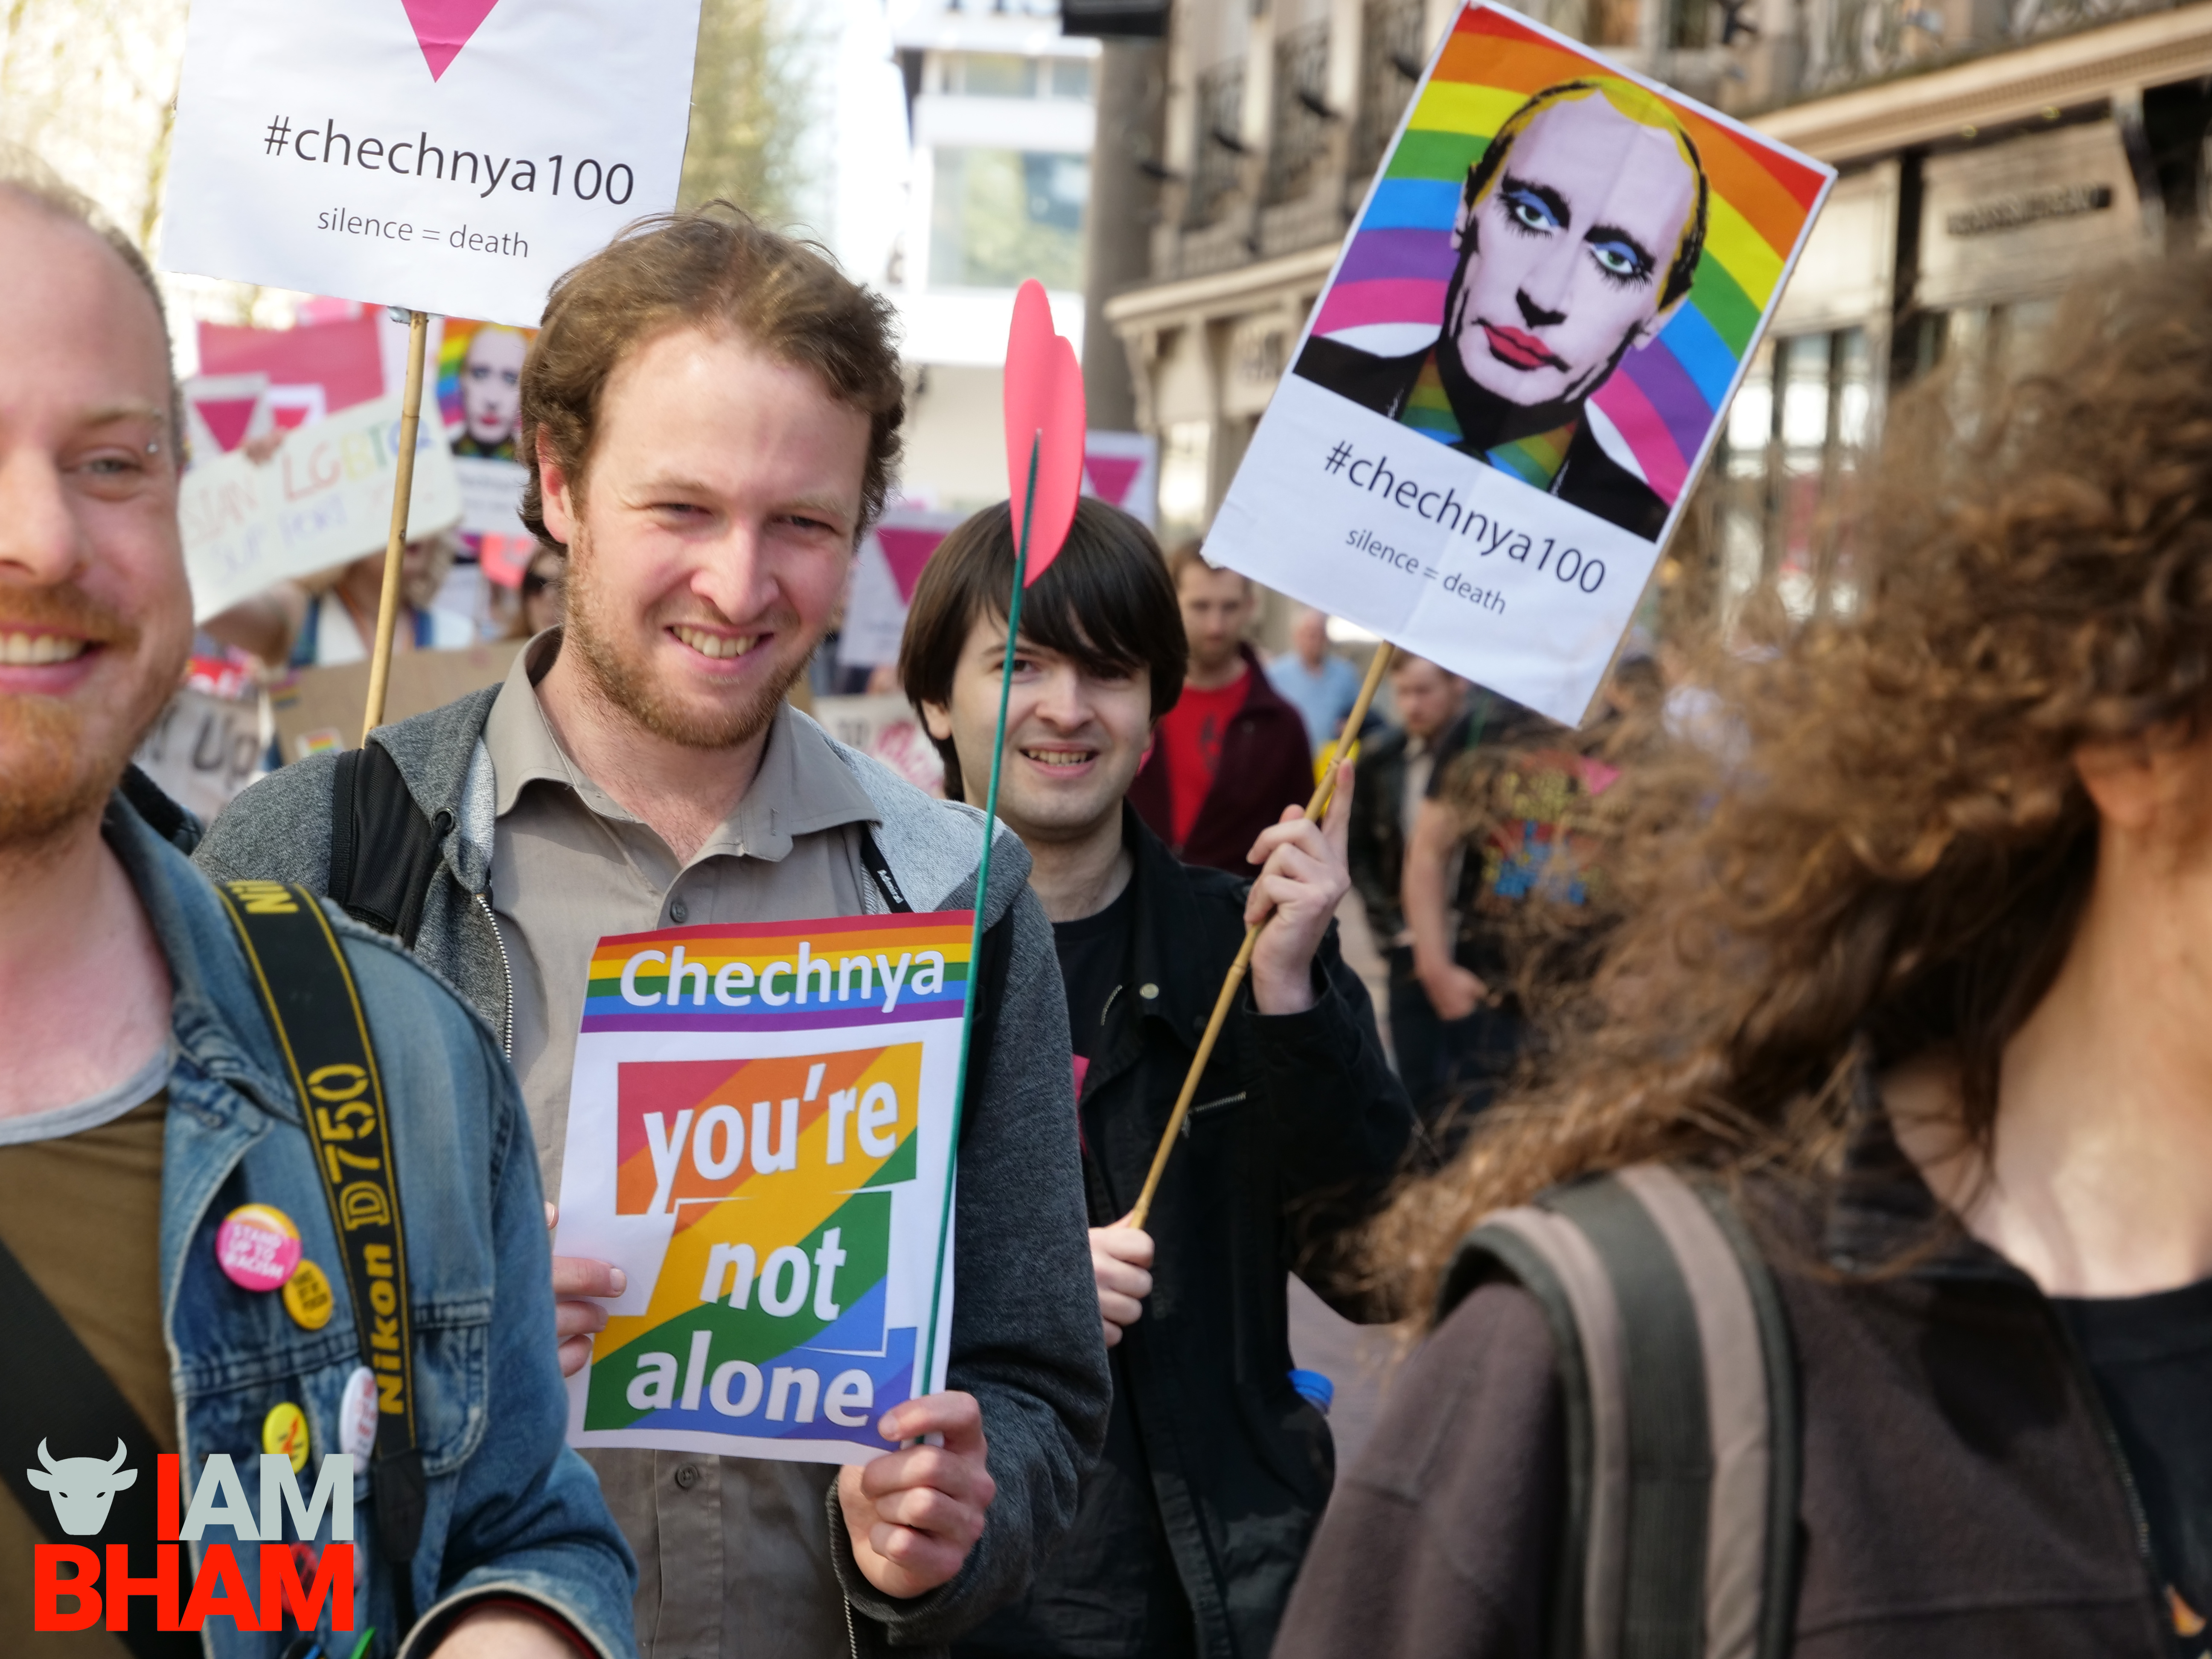 Around 200 people marched in Birmingham to show support for the victims of recent anti-LGBT human rights abuses in Chechnya (Photograph: Adam Yosef)